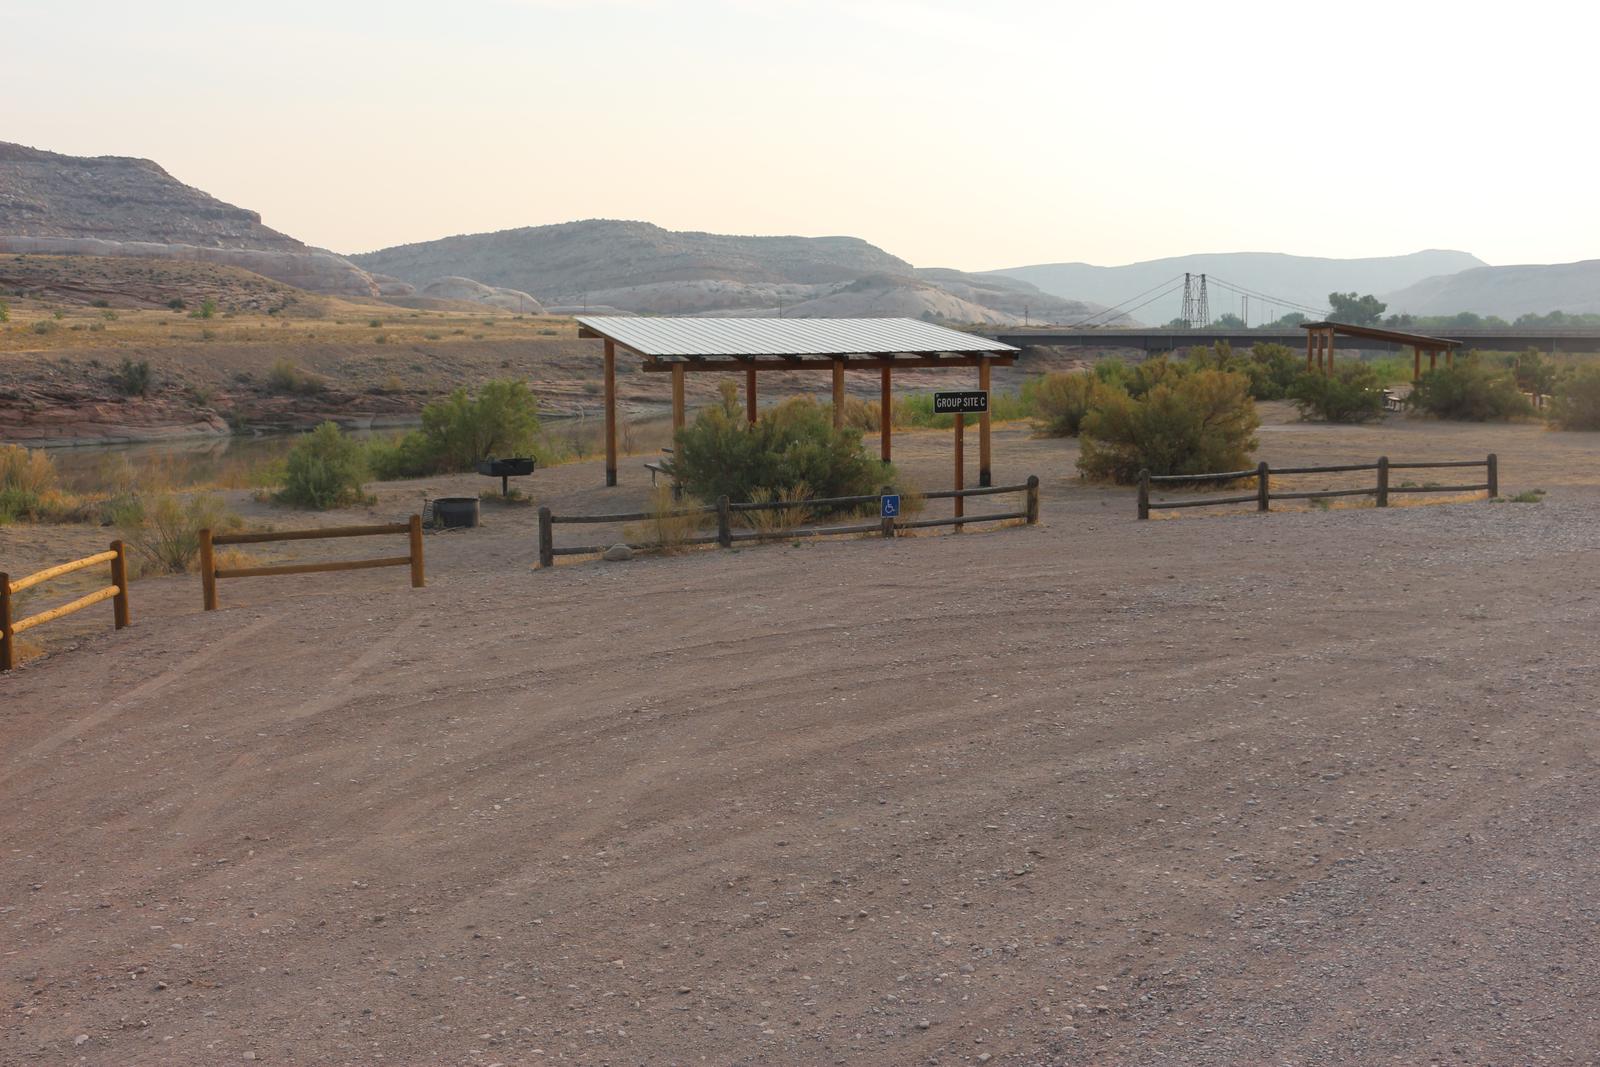 Dewey Bridge Group Site C parking area, picnic tables, and shade shelter. The historic Dewey Bridge in the distance. 